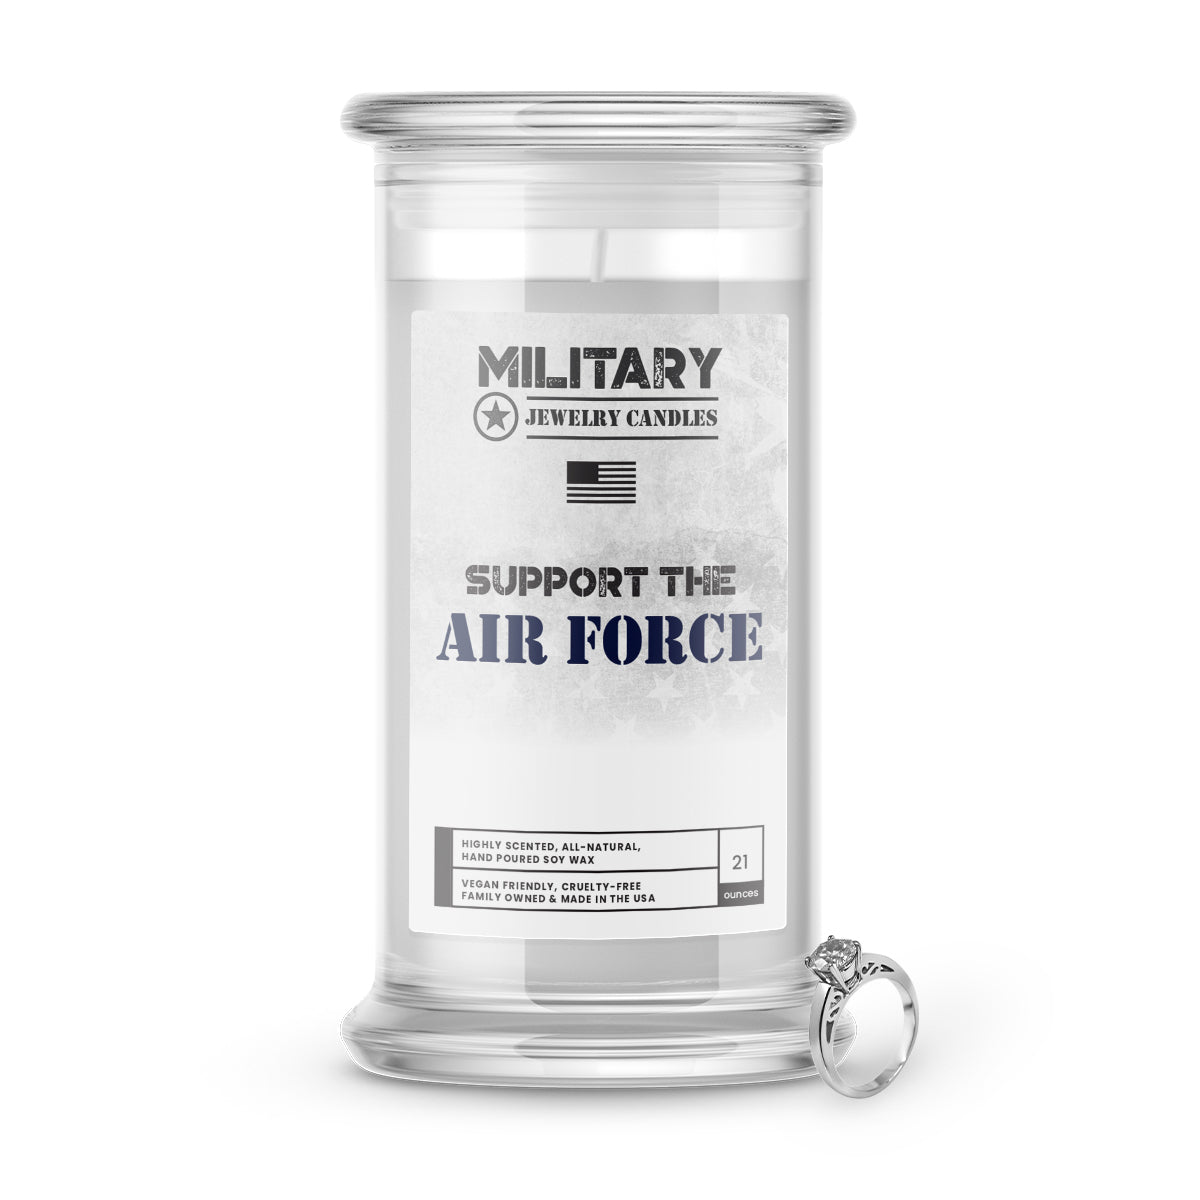 SUPPORT THE AIR FORCE | Military Jewelry Candles